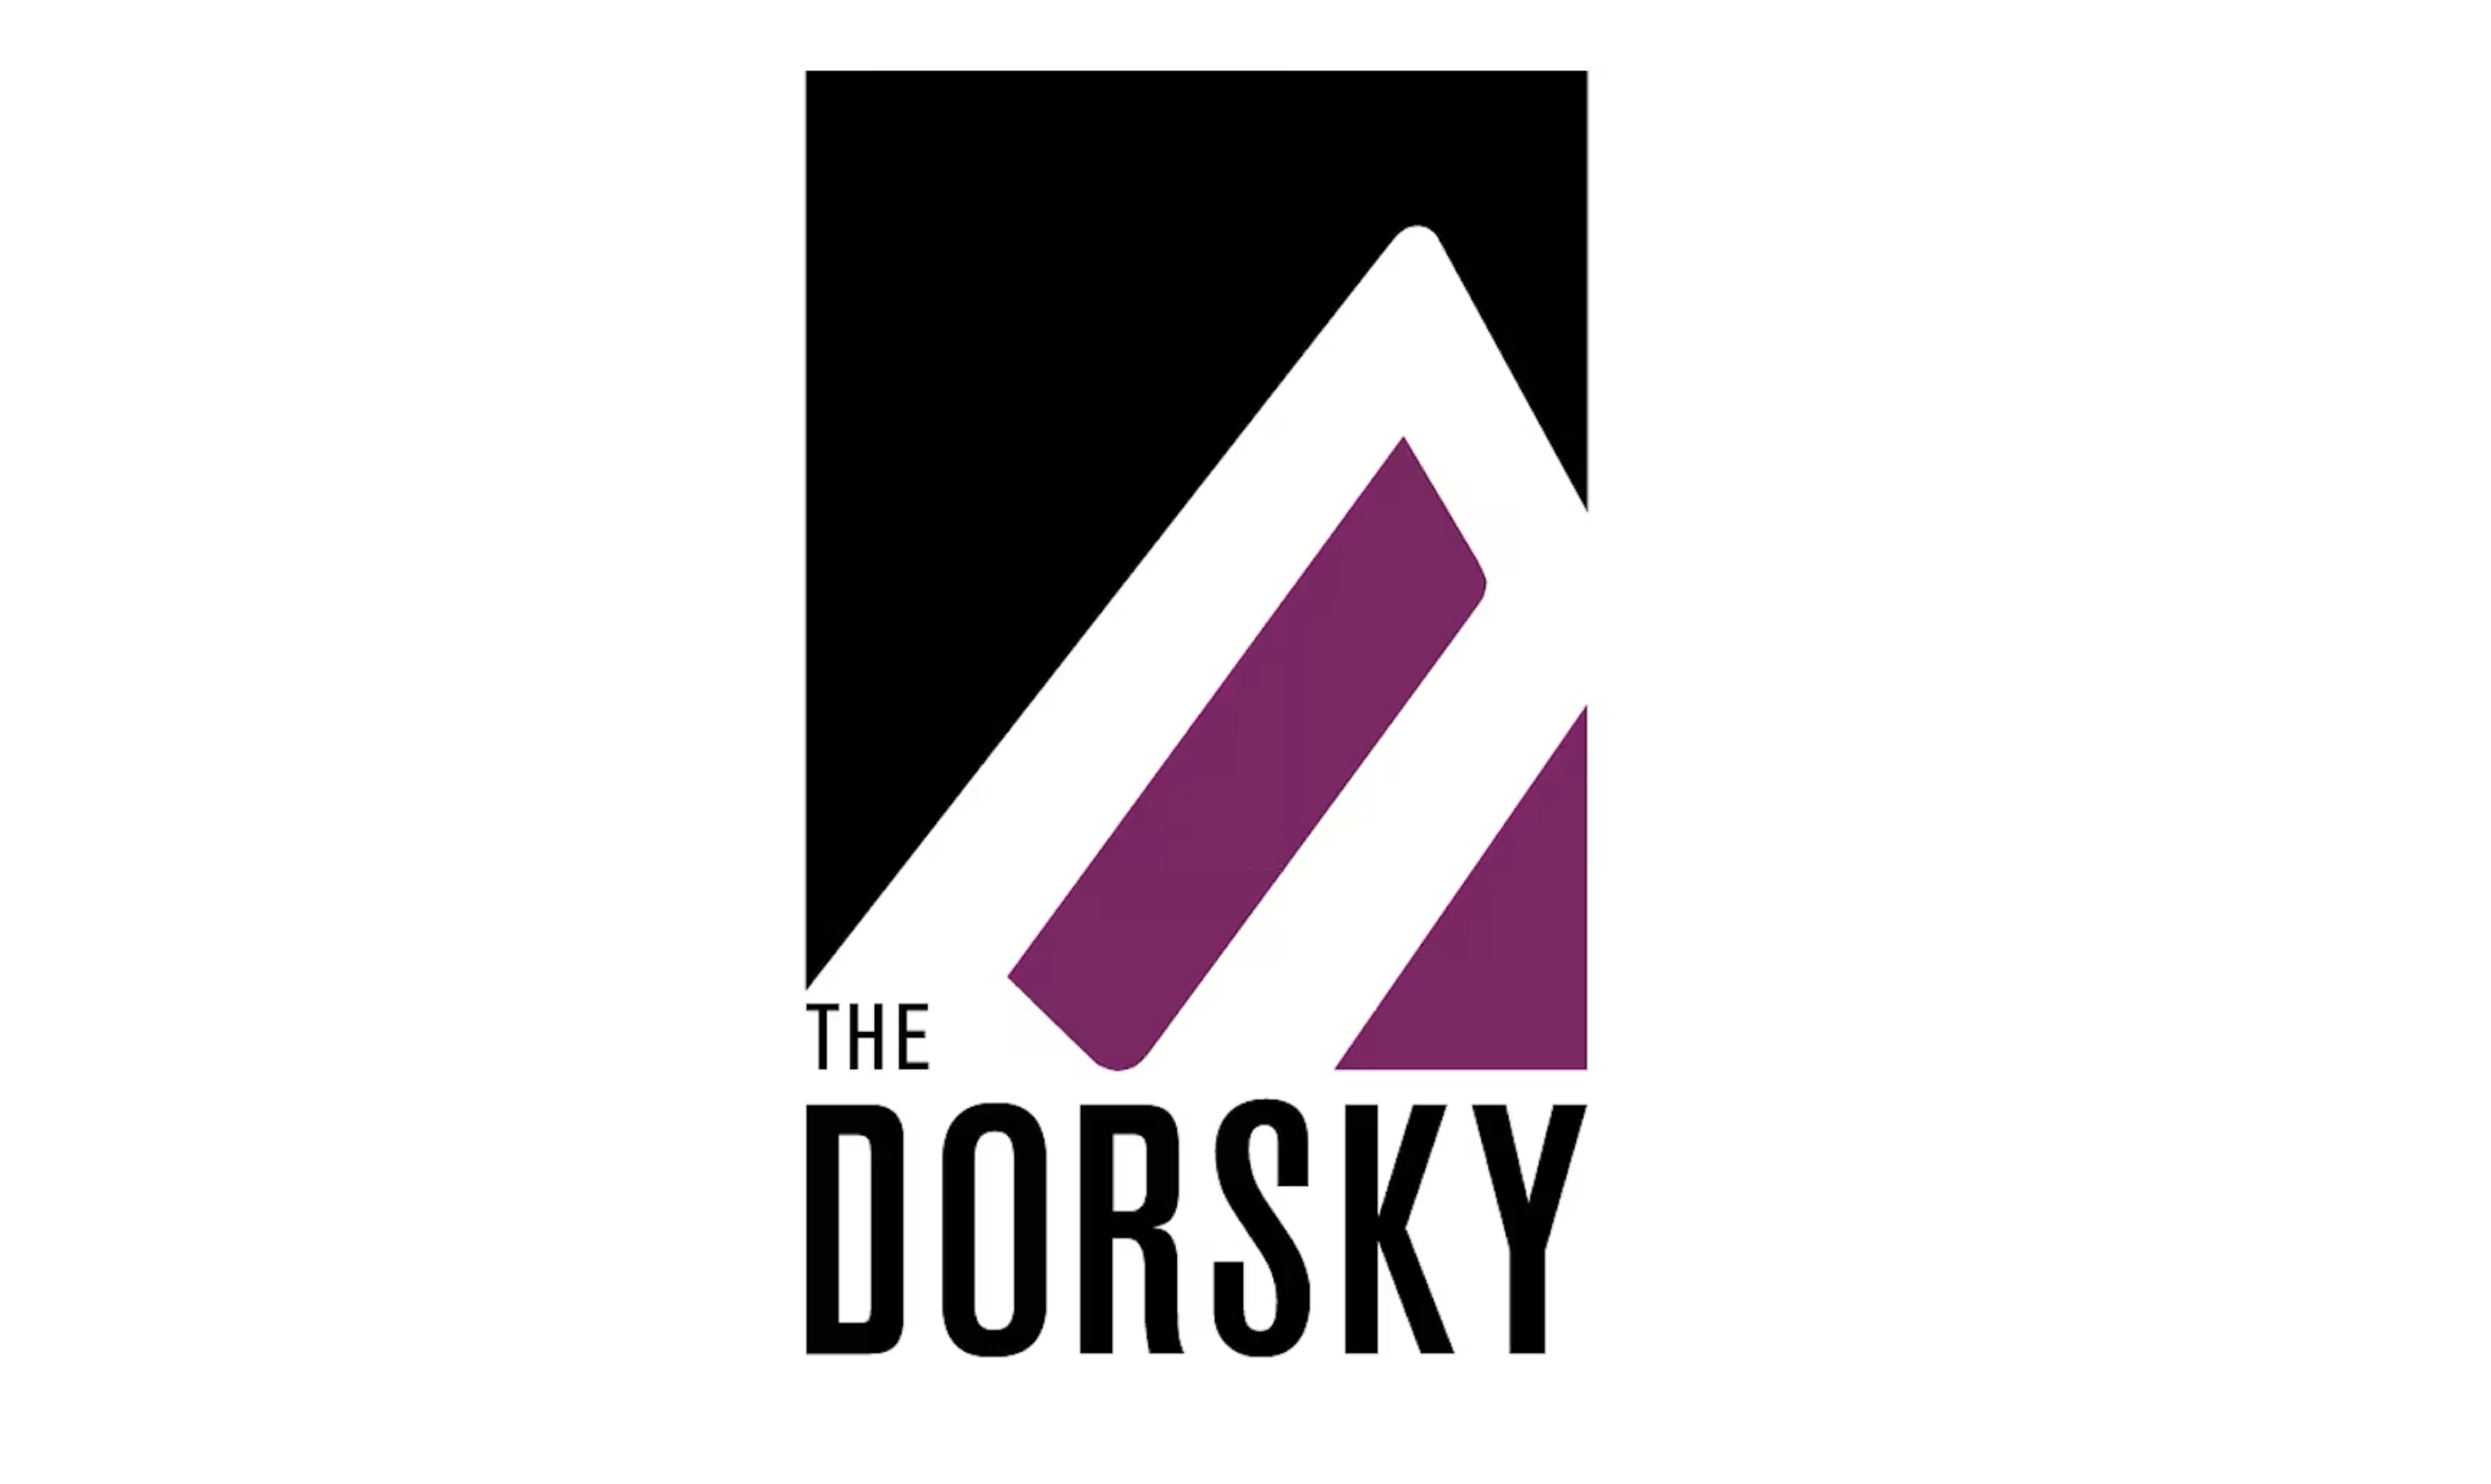 People of The Dorsky